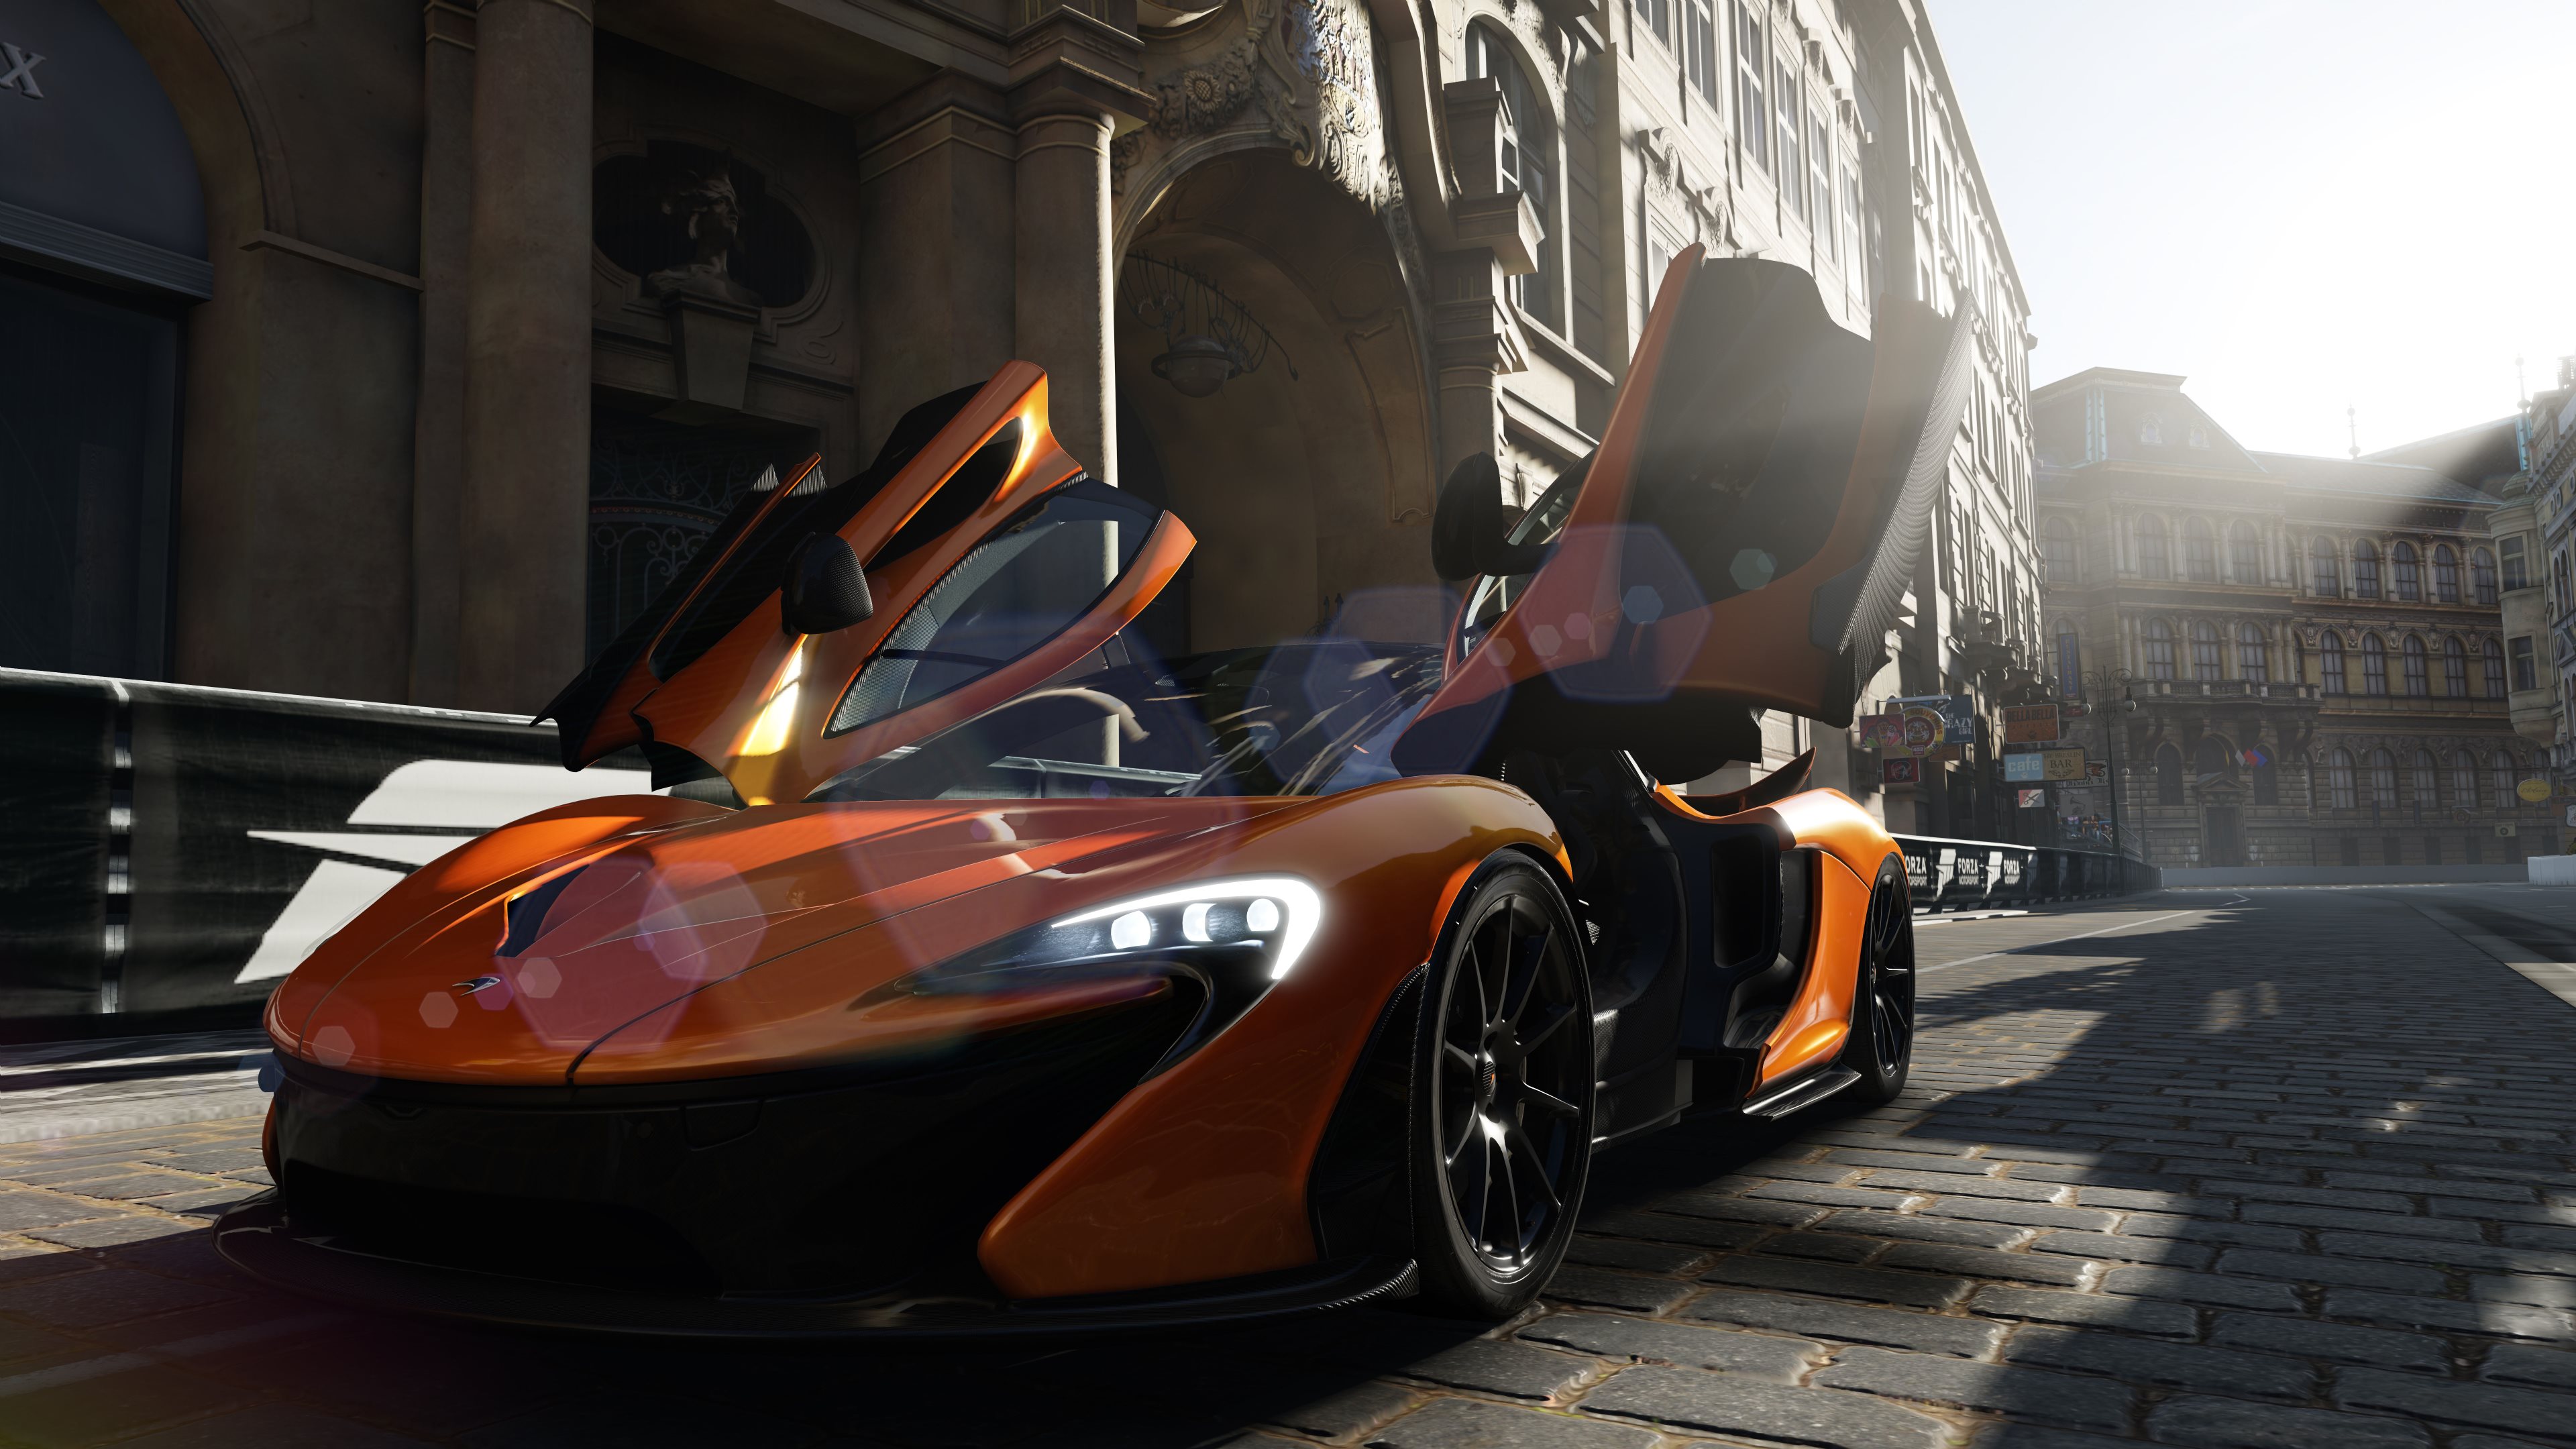 65 Forza Motorsport 5 HD Wallpapers | Backgrounds - Wallpaper Abyss